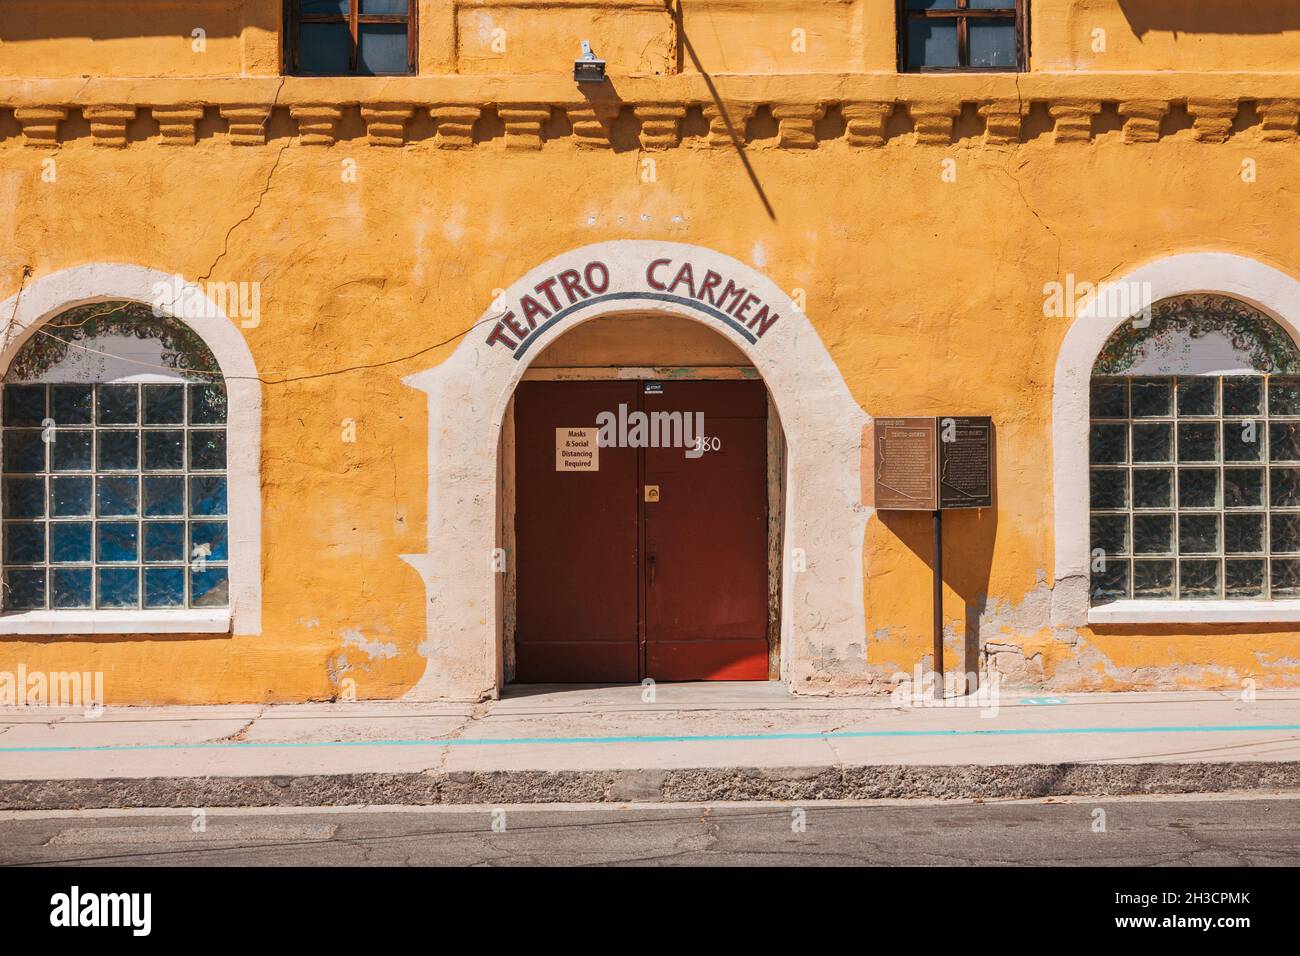 The front view of Teatro Carmen, an historic theater built in 1915 in what is now Barrio Viejo (Old Neighborhood) in Tucson, Arizona Stock Photo